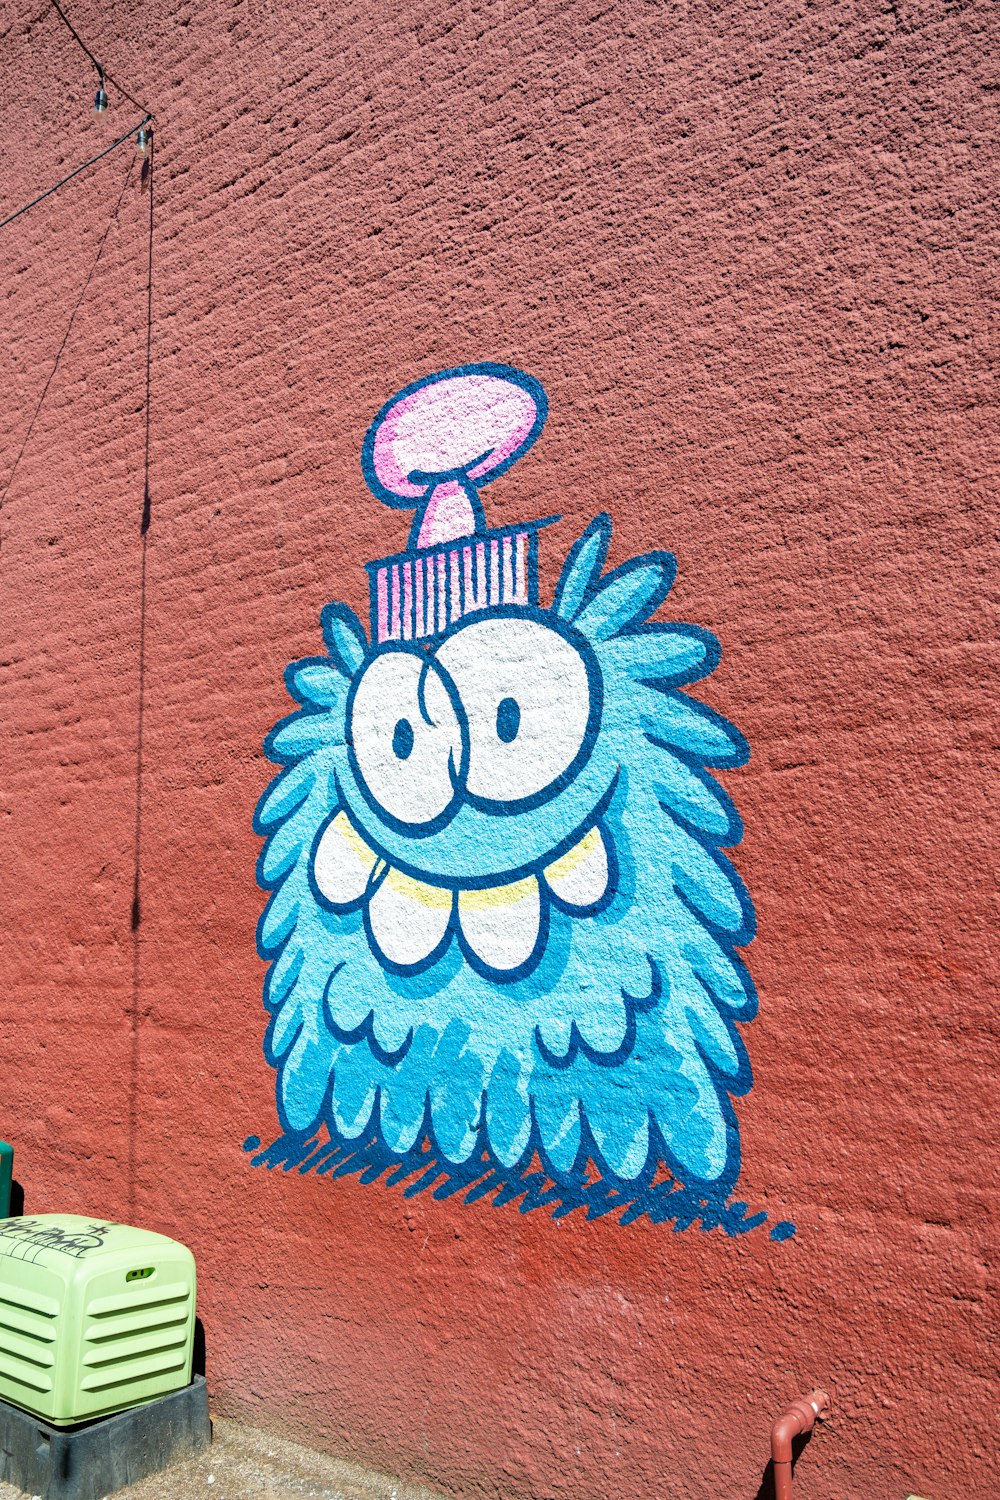 a painting of a cartoon character on the side of a building